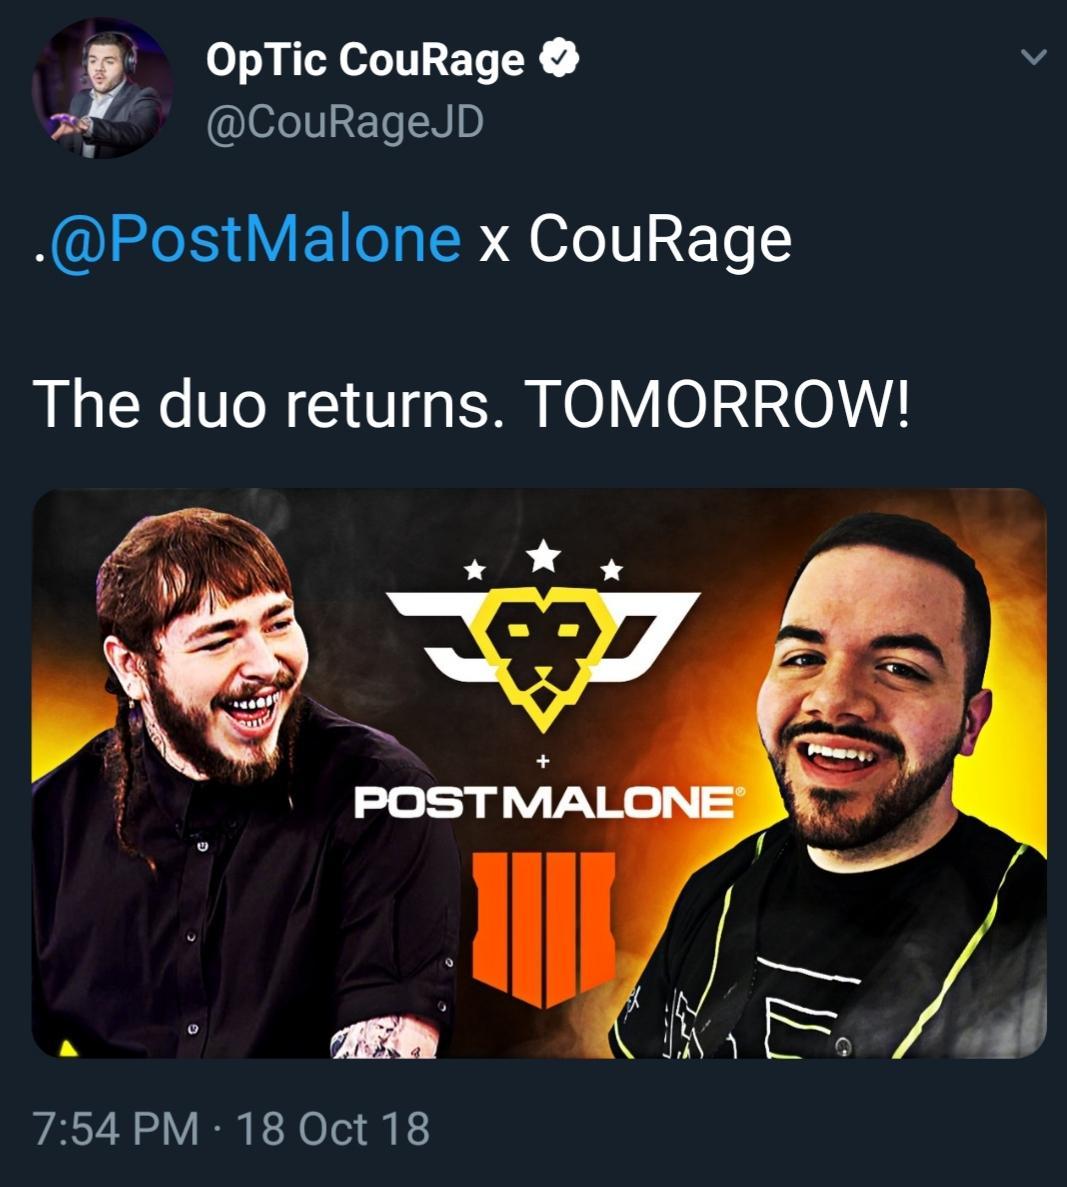 Couage Optic Logo - Post Malone will be playing duos on Black Ops 4 Blackout with Optic ...